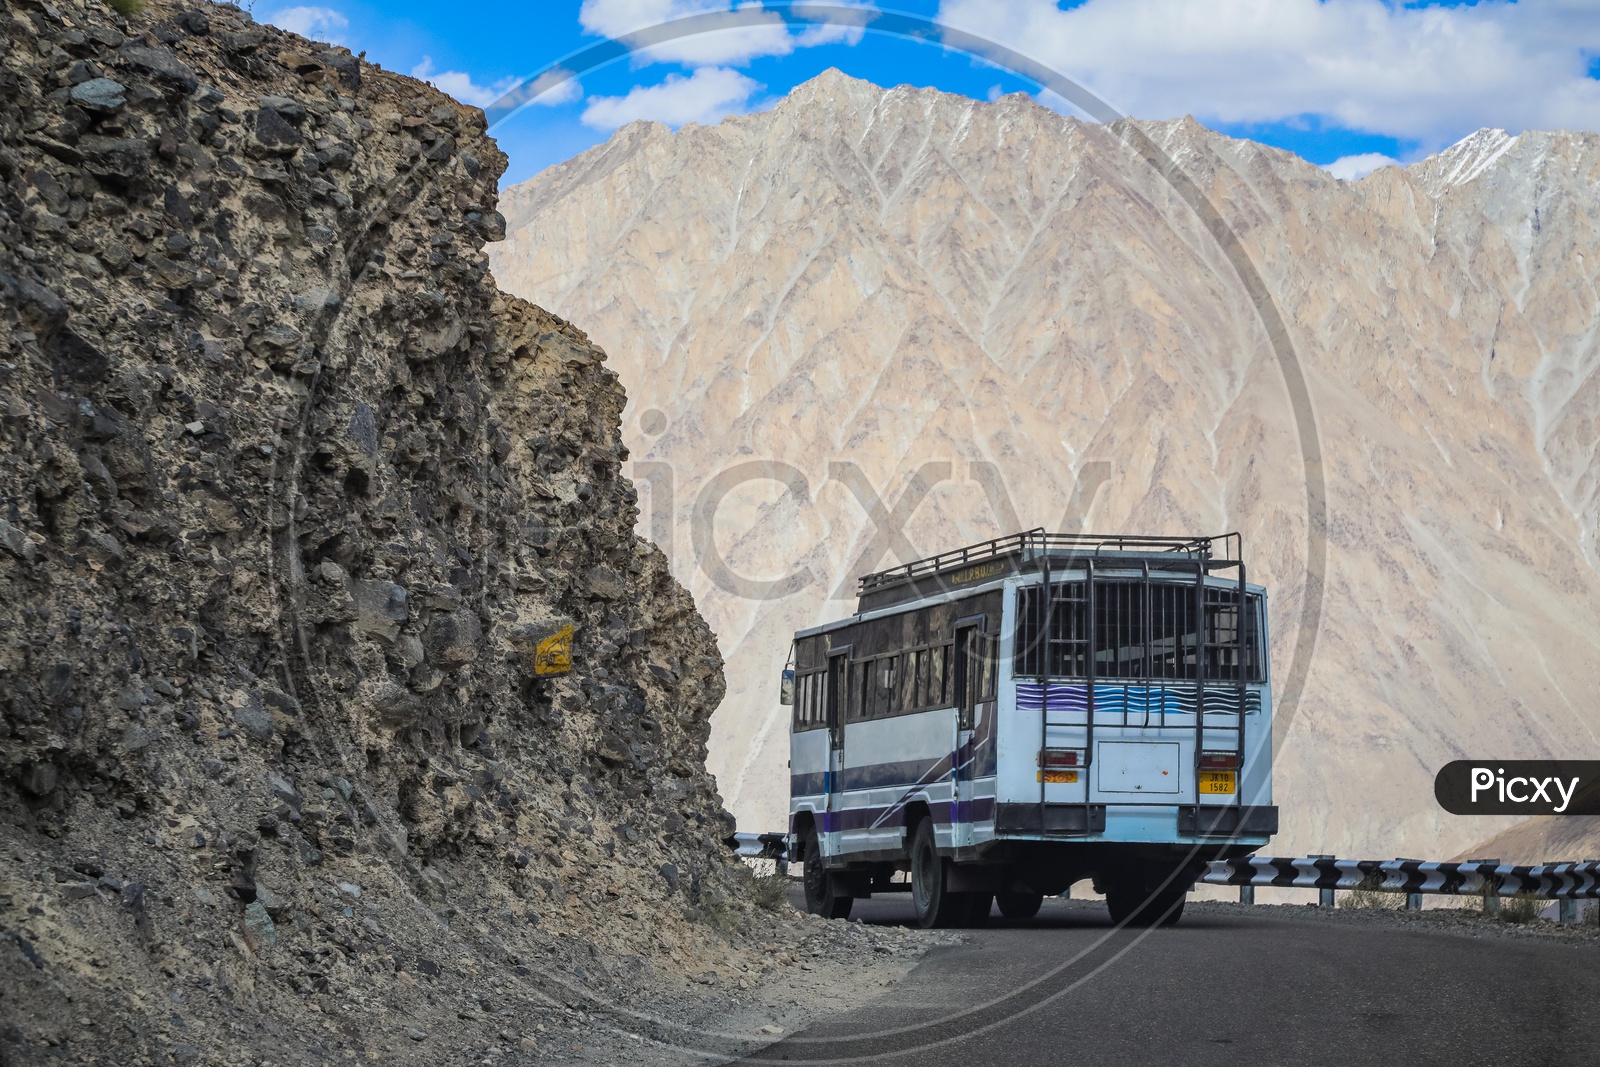 Moving bus on the roadway by the mountains